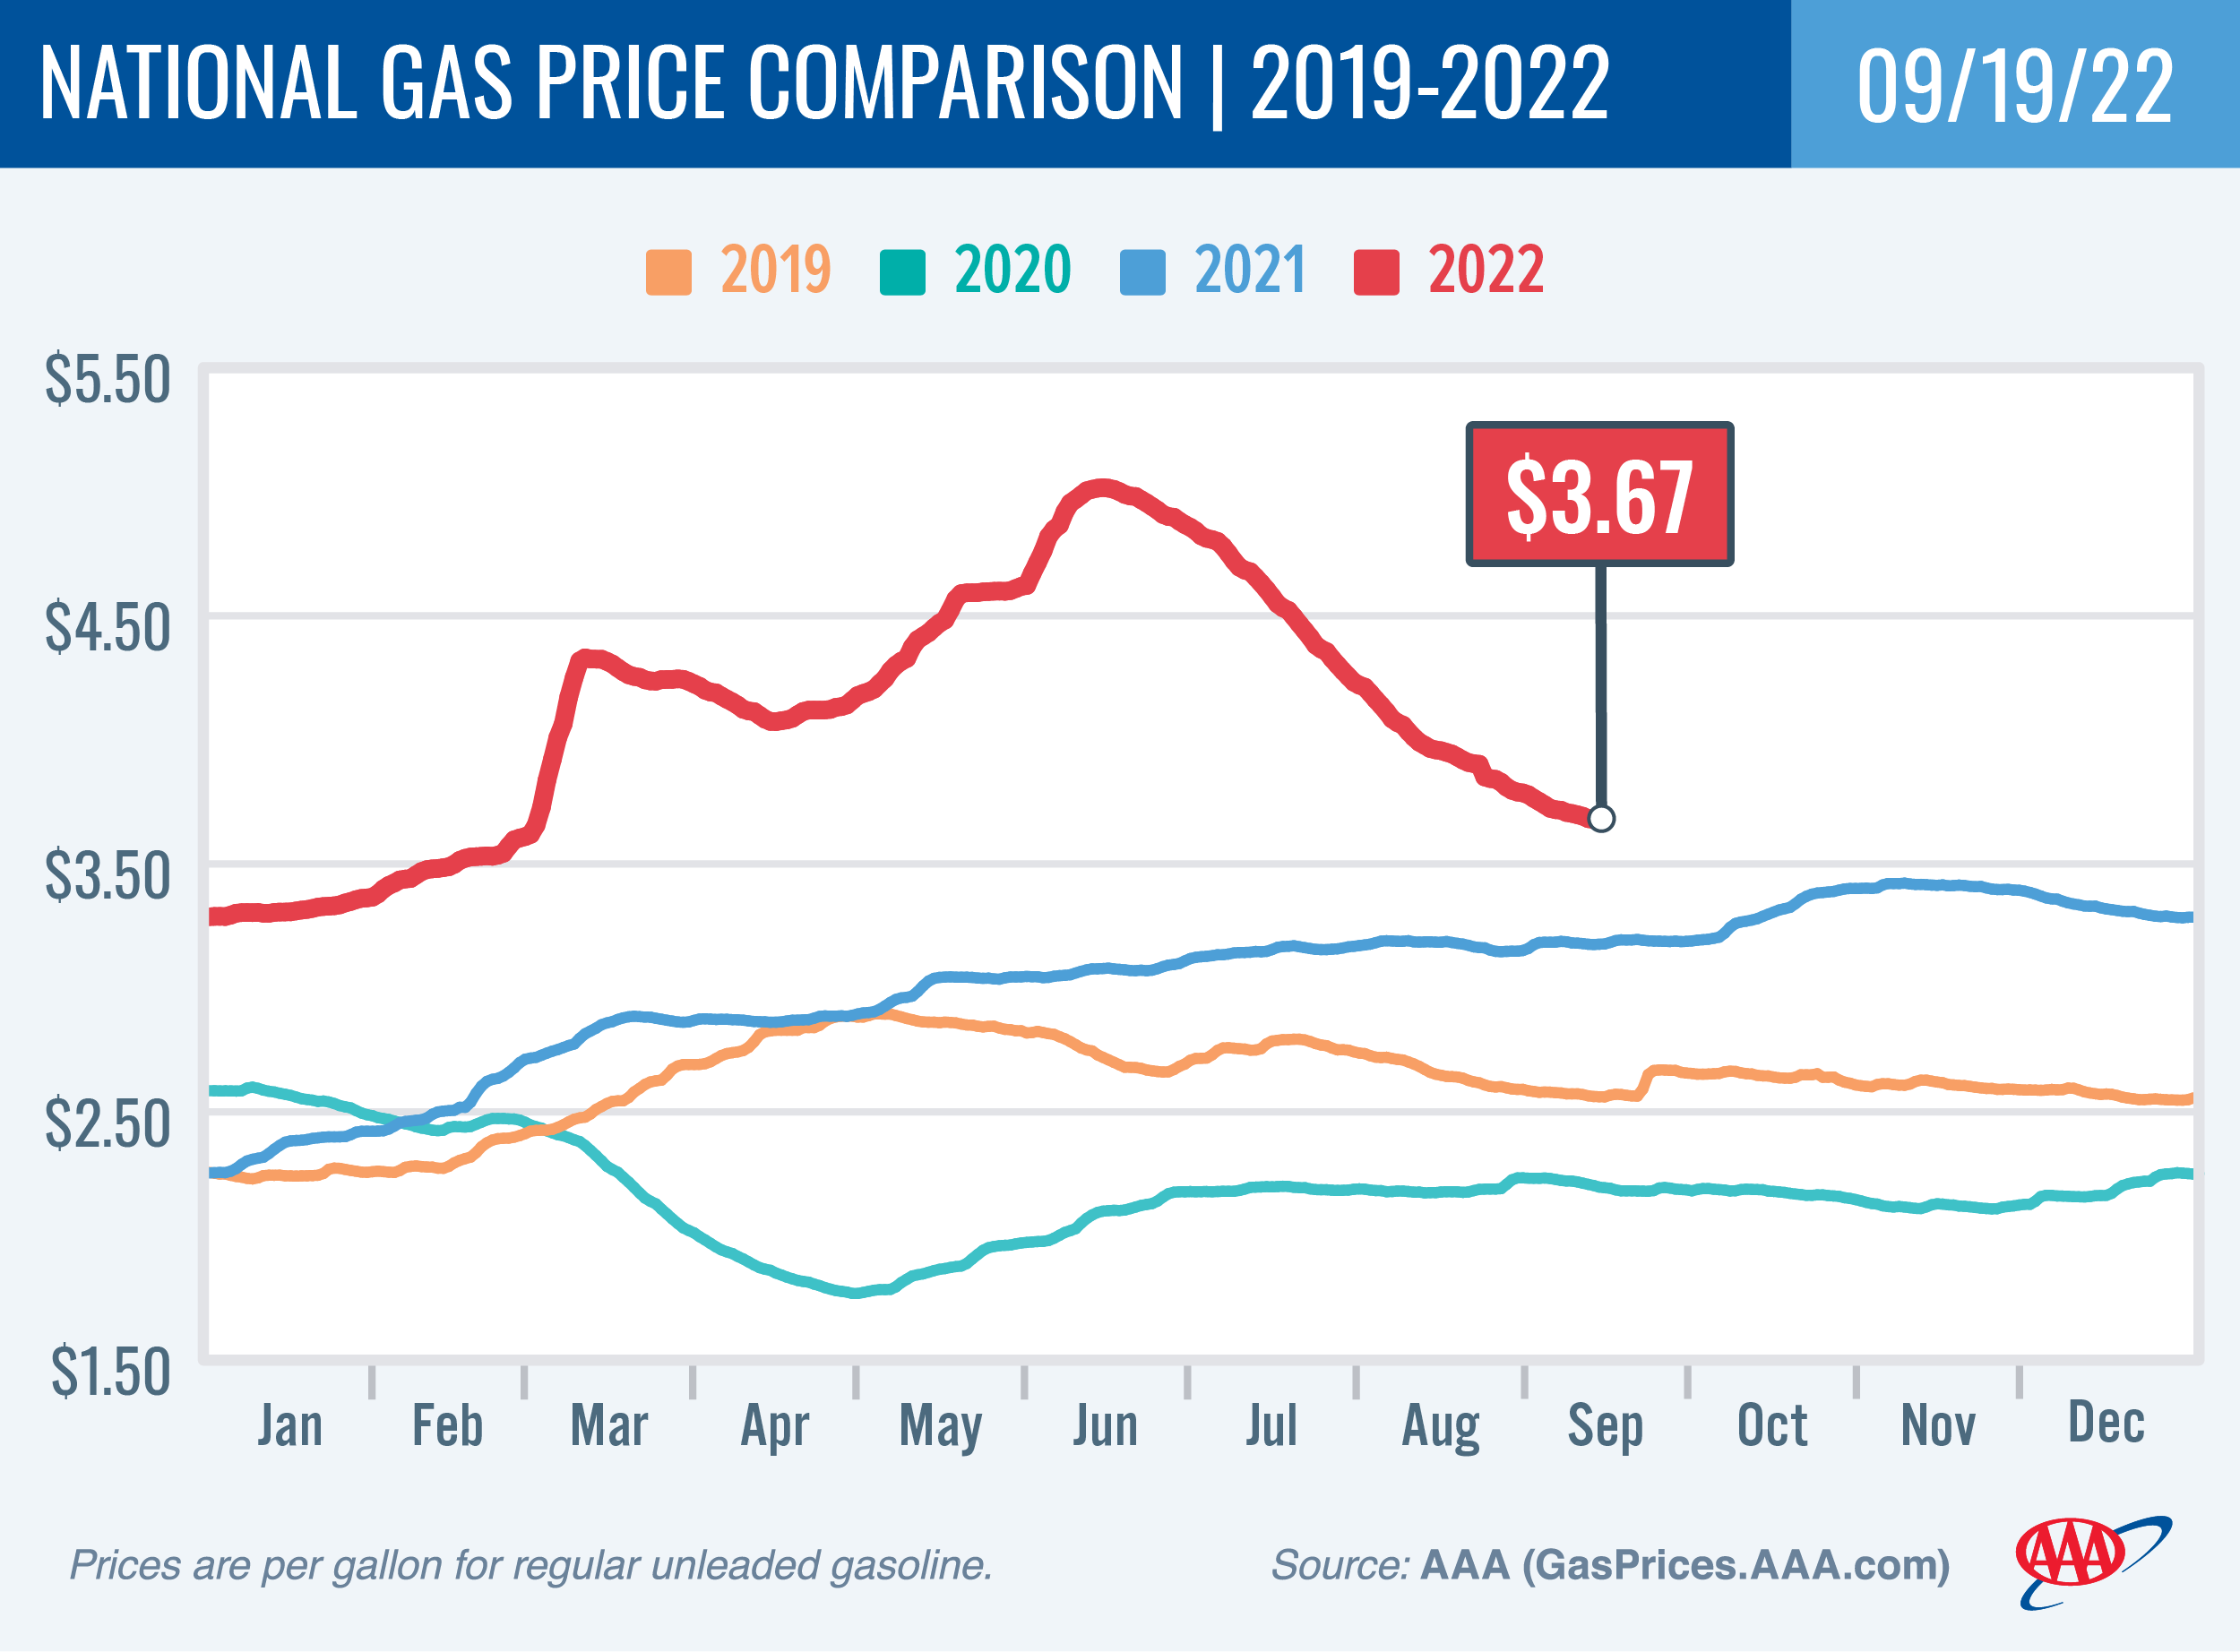 National Gas Price Comparison for September 19, 2022